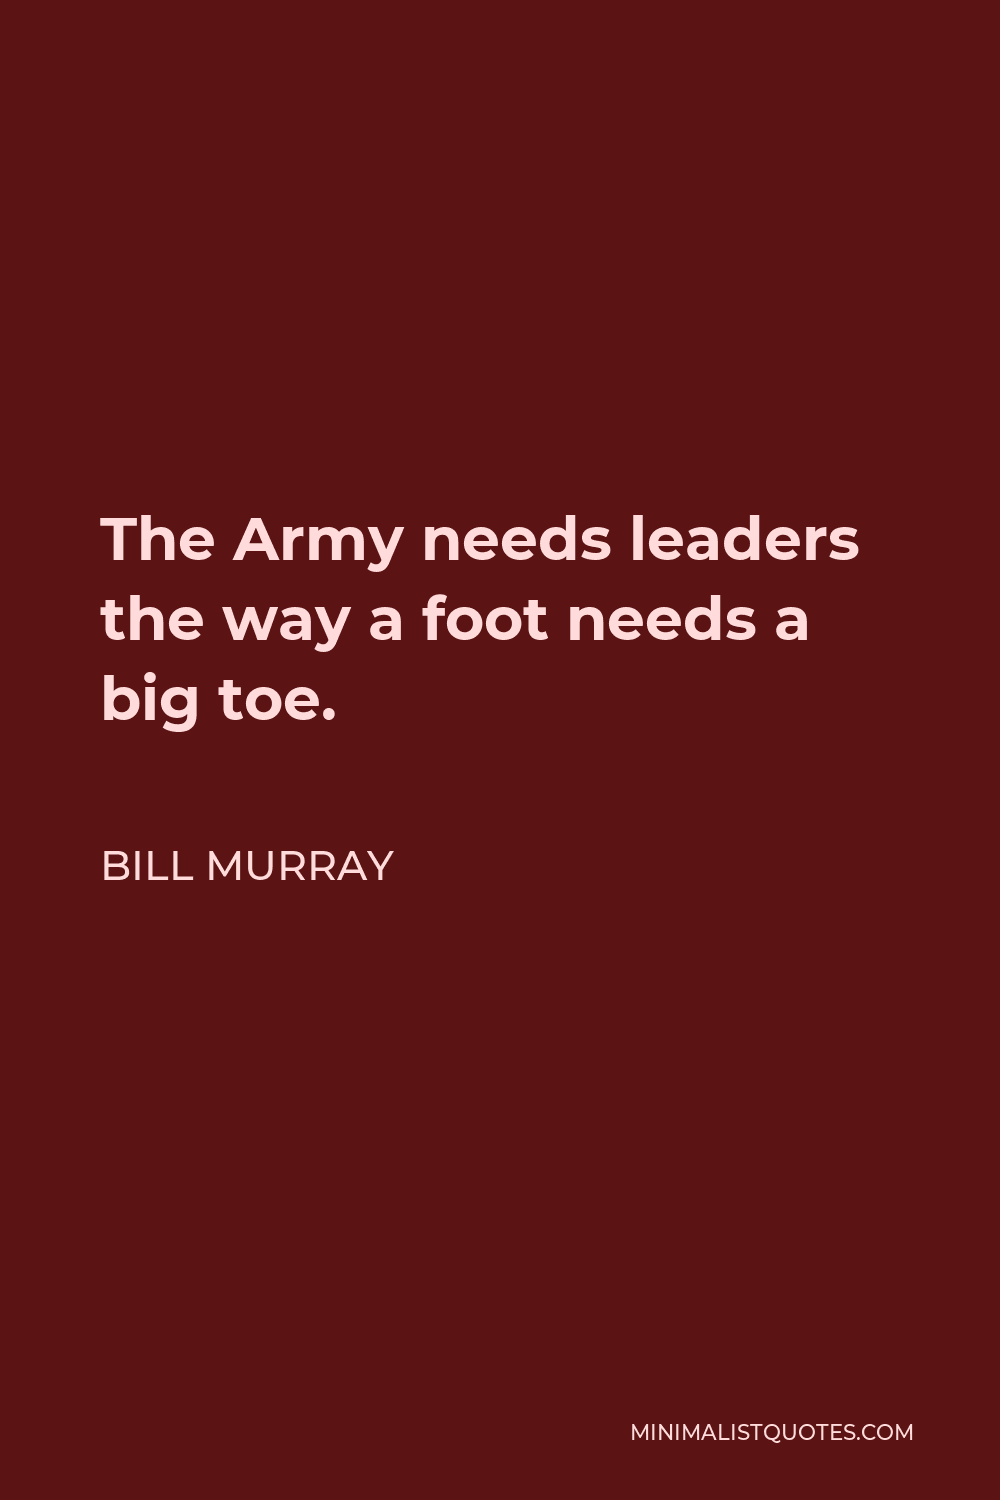 Bill Murray Quote - The Army needs leaders the way a foot needs a big toe.